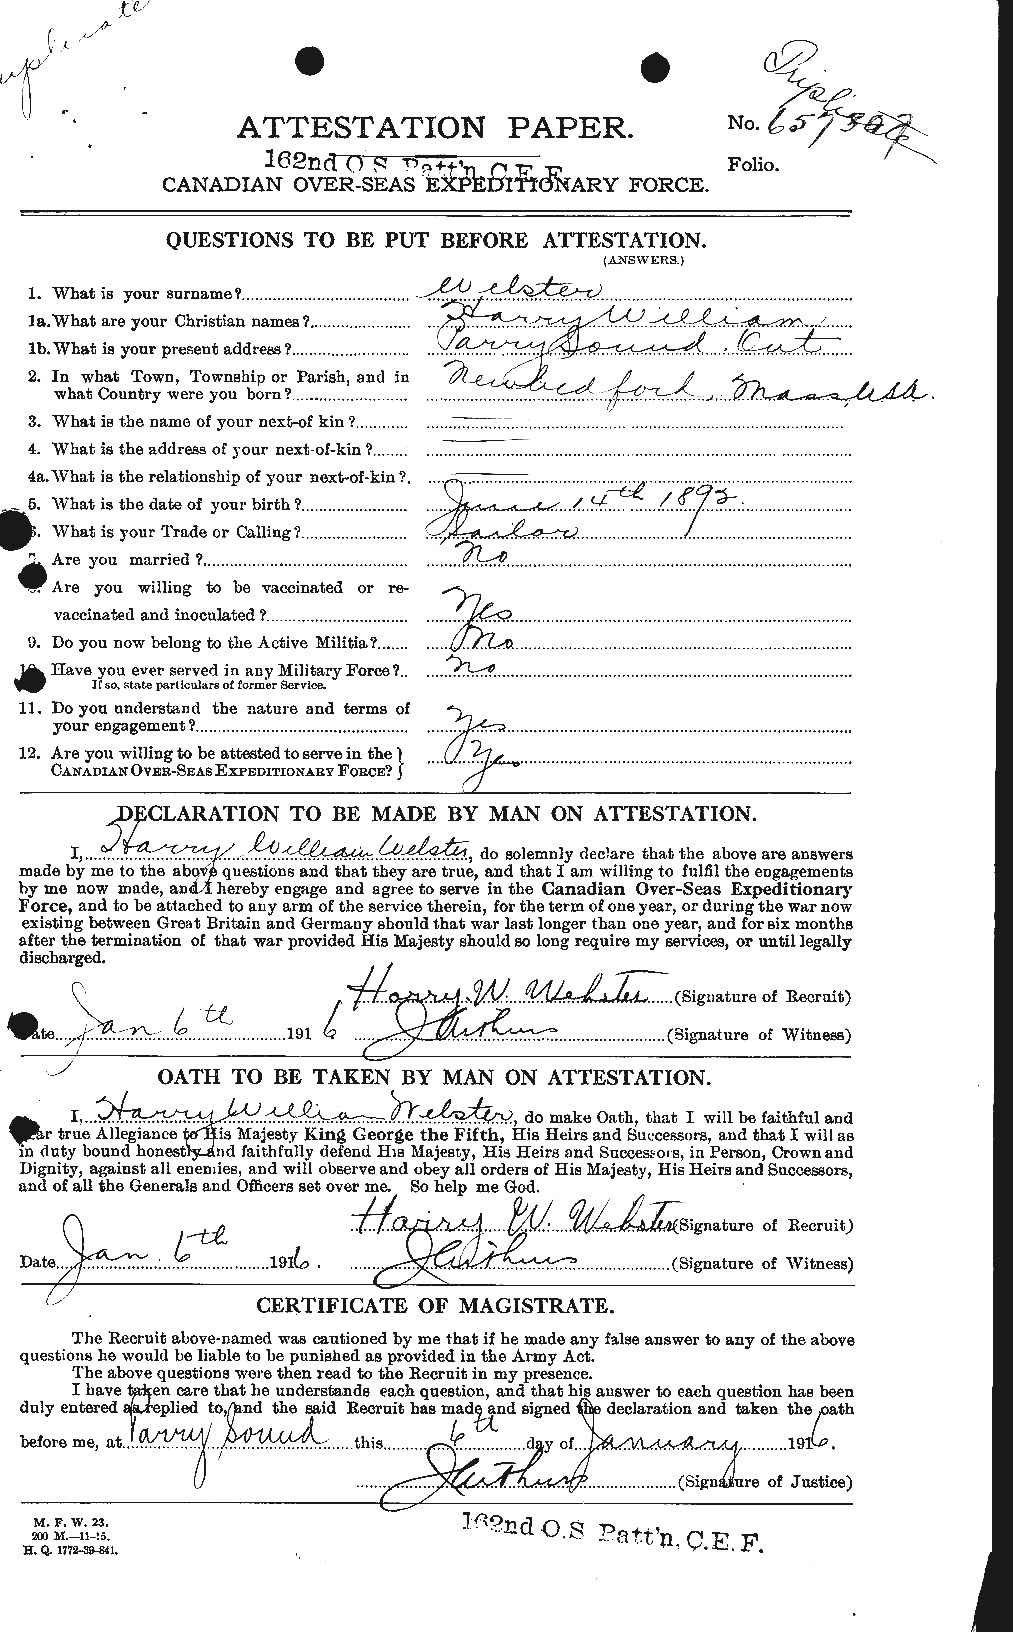 Personnel Records of the First World War - CEF 670426a